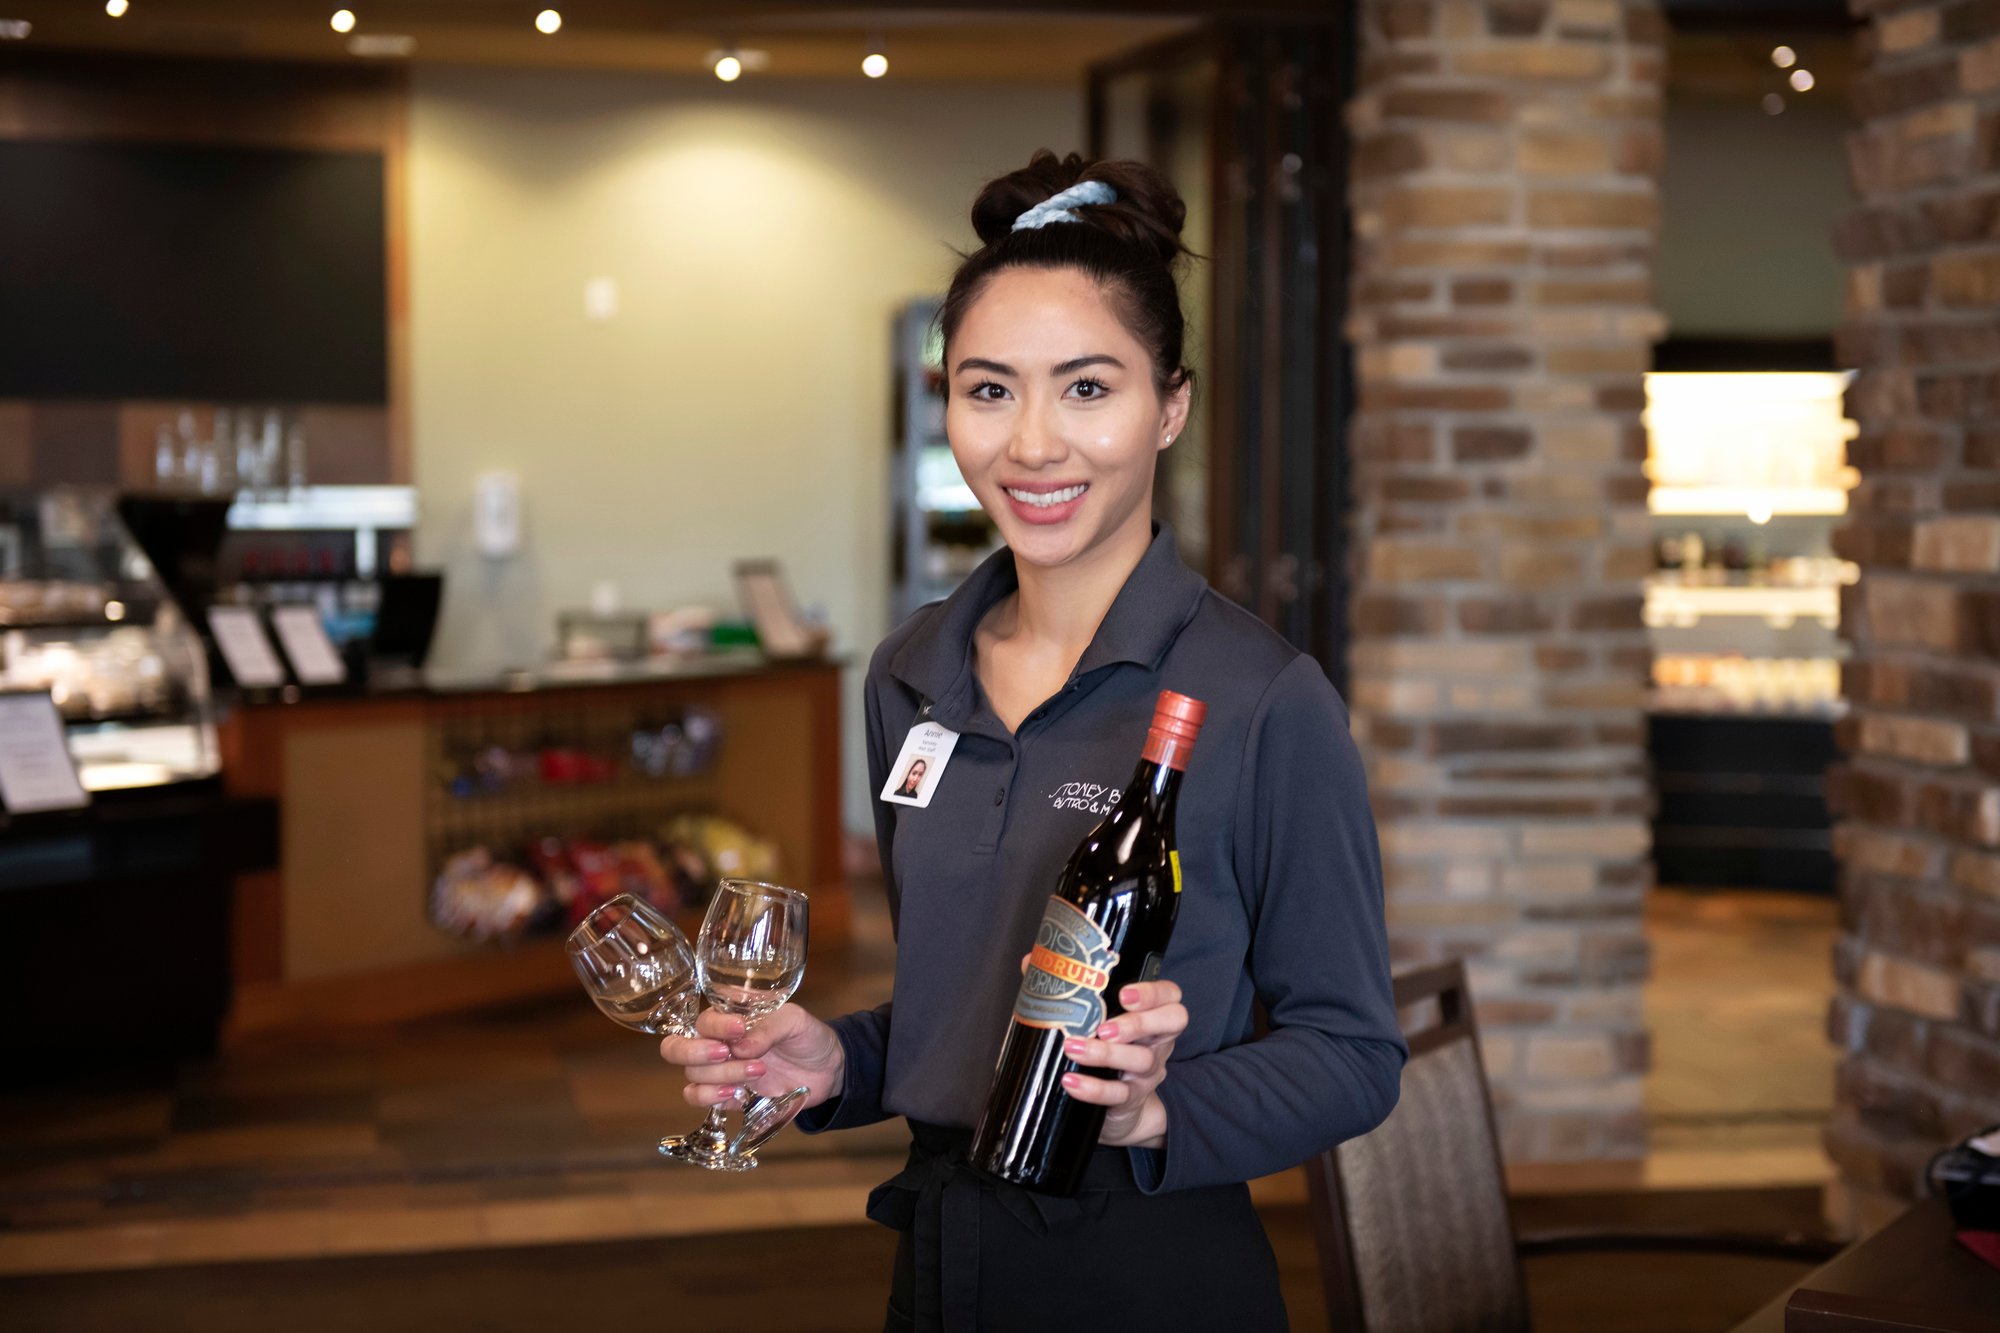 Waitress holding a bottle of wine and glasses